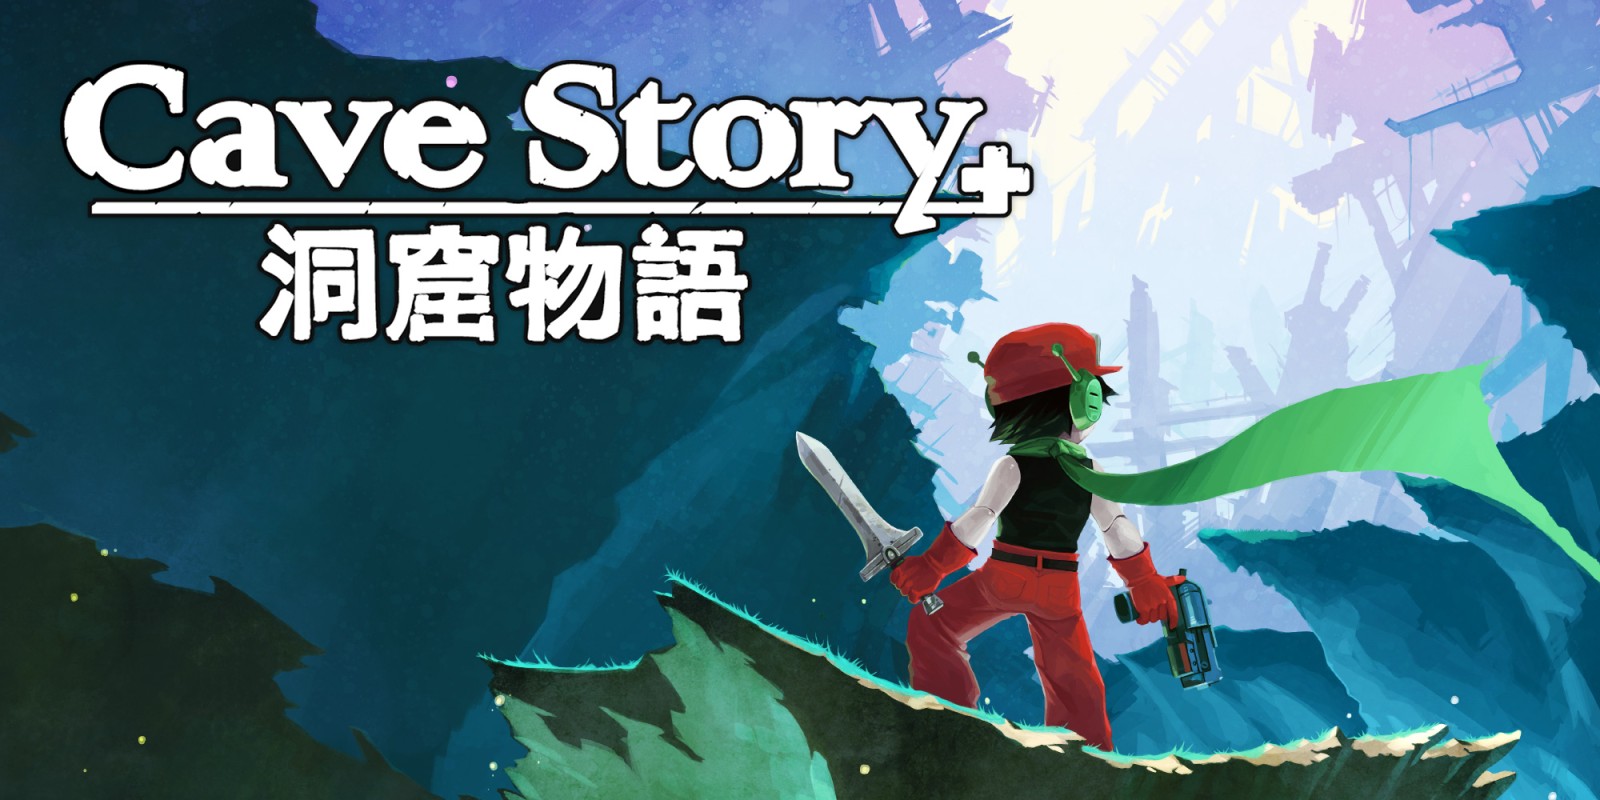 Deep deals on fantastic indie Switch games today: Cave Story, Binding of Is...